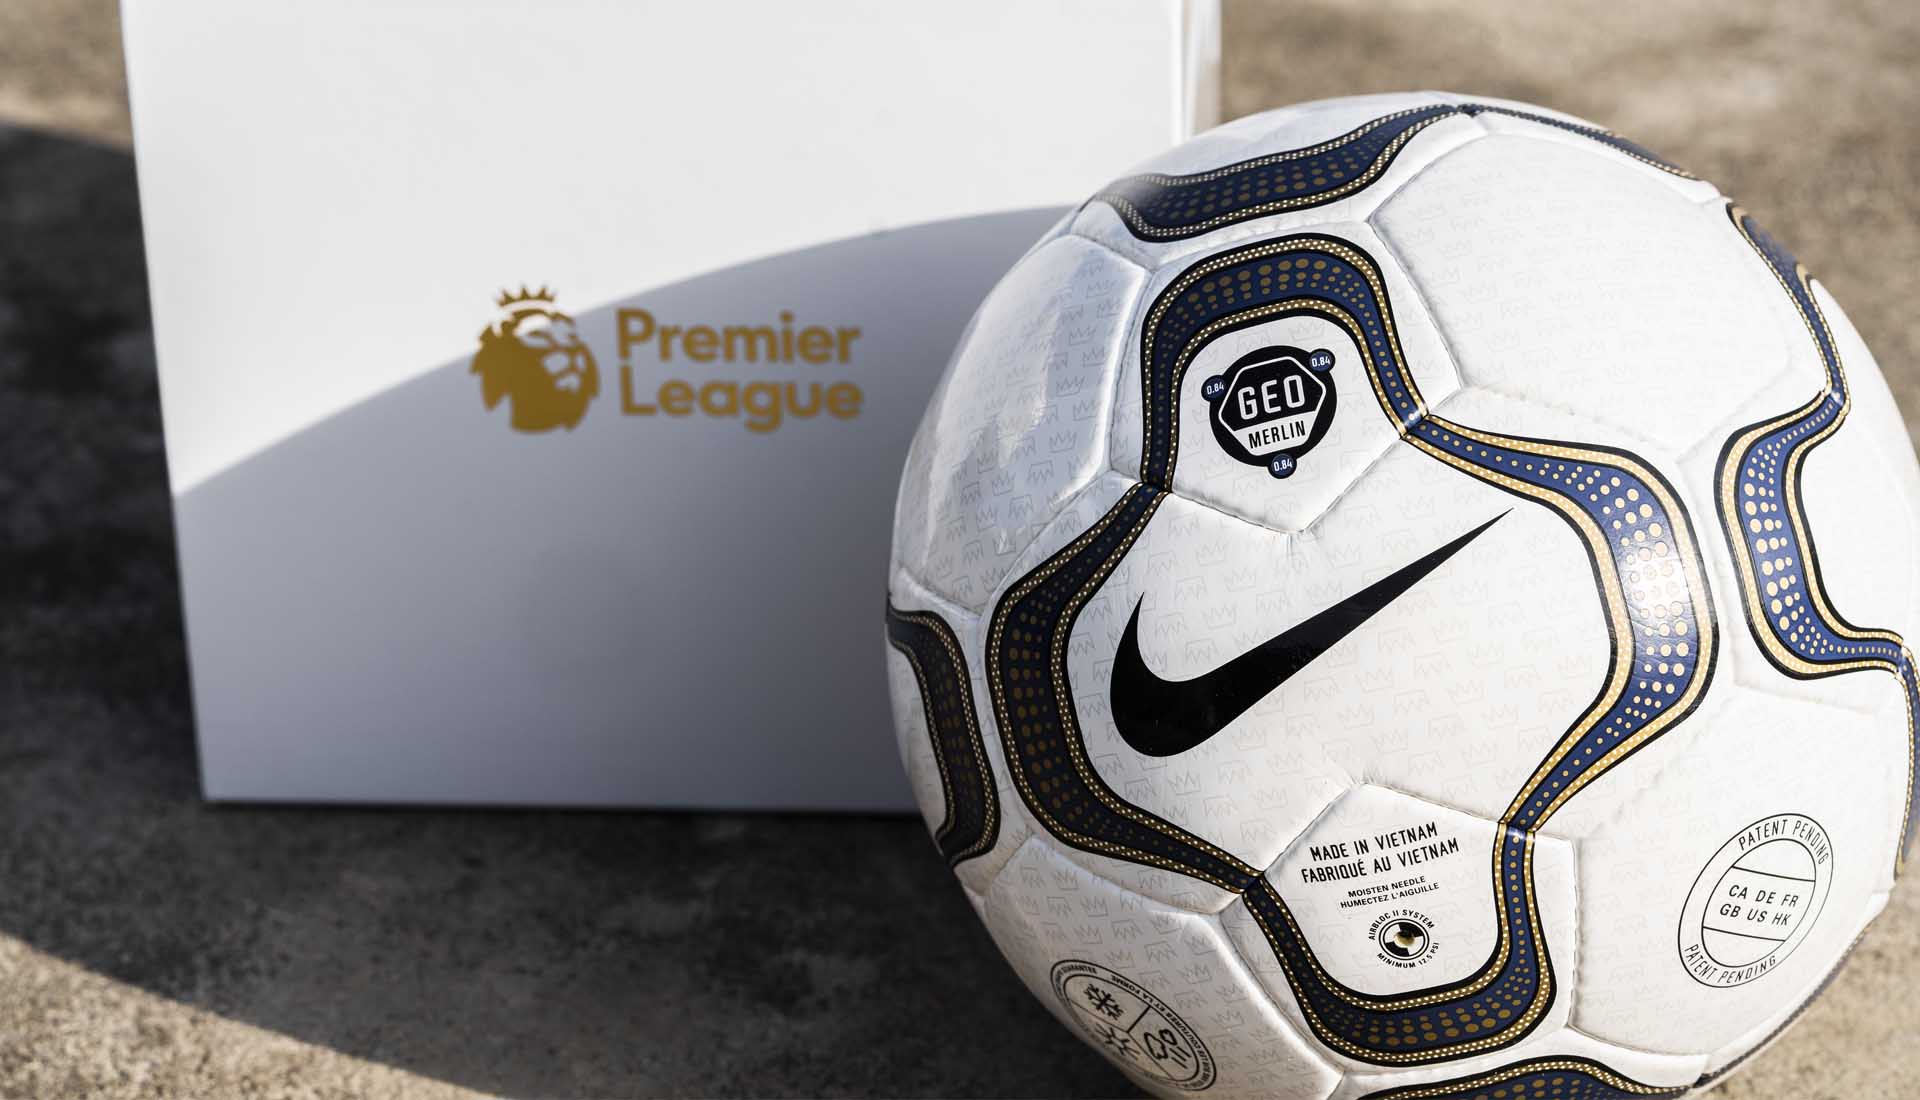 Nike Re-Launch The Premier Geo Merlin "Anniversary" Ball - SoccerBible